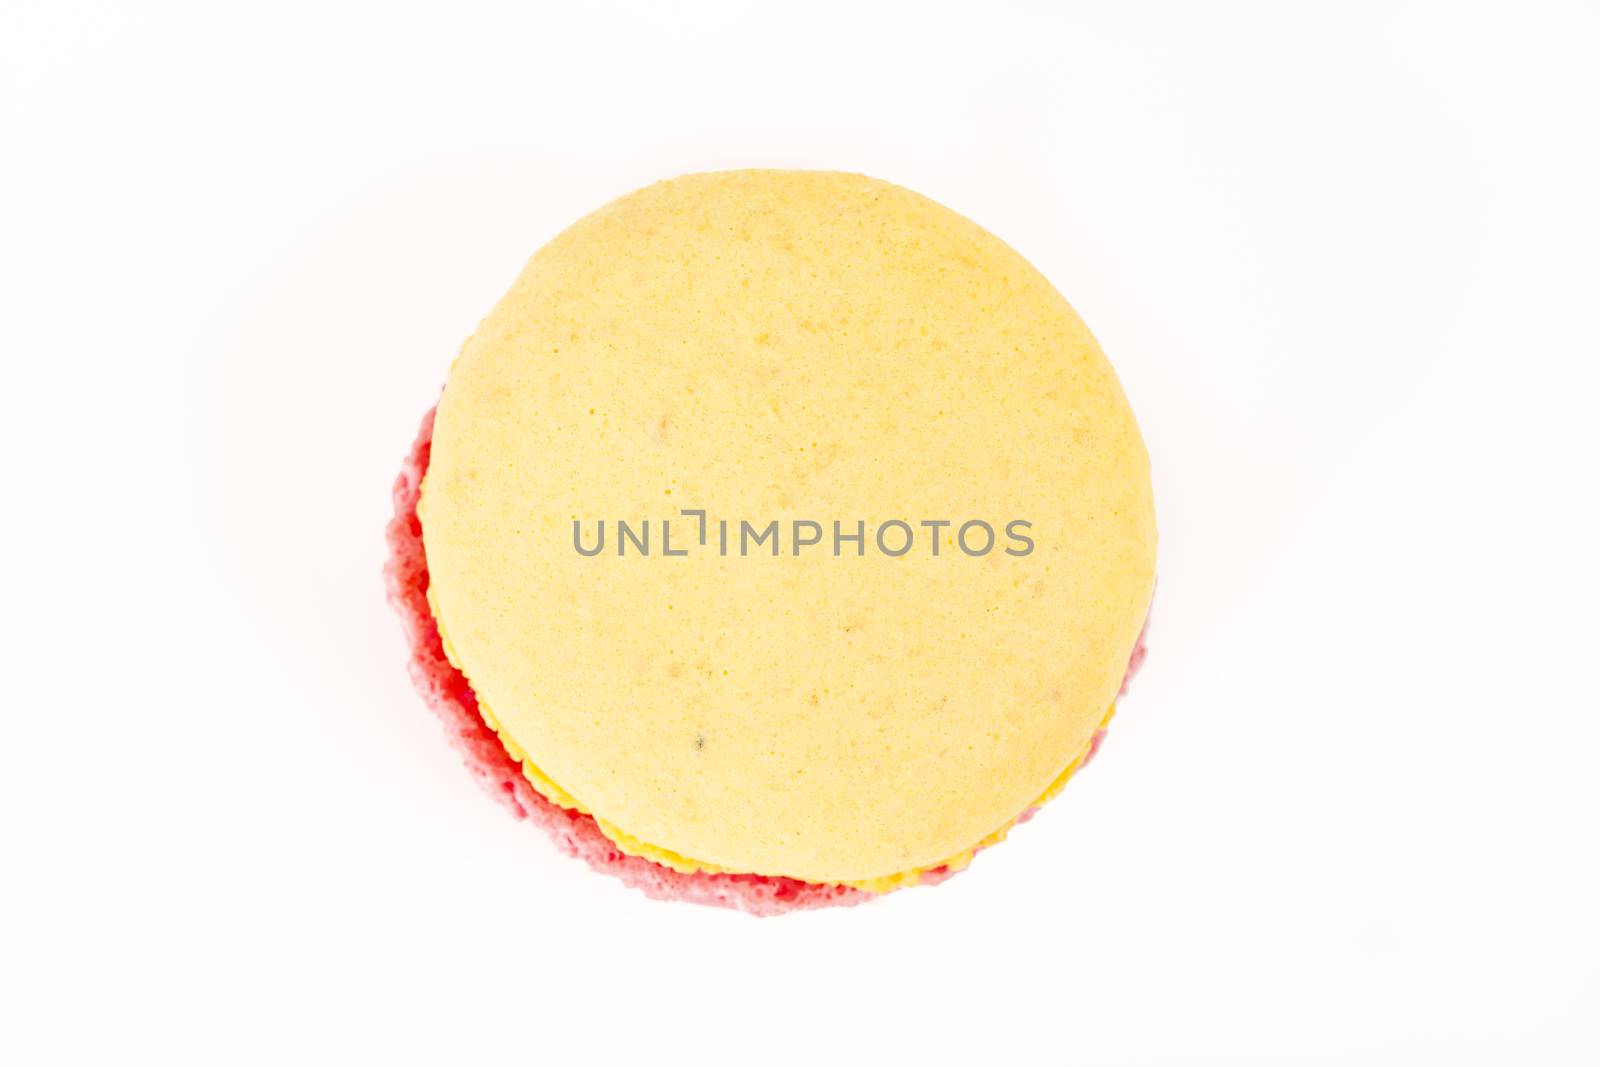 French colorful home made pink yellow macarons on white bakground